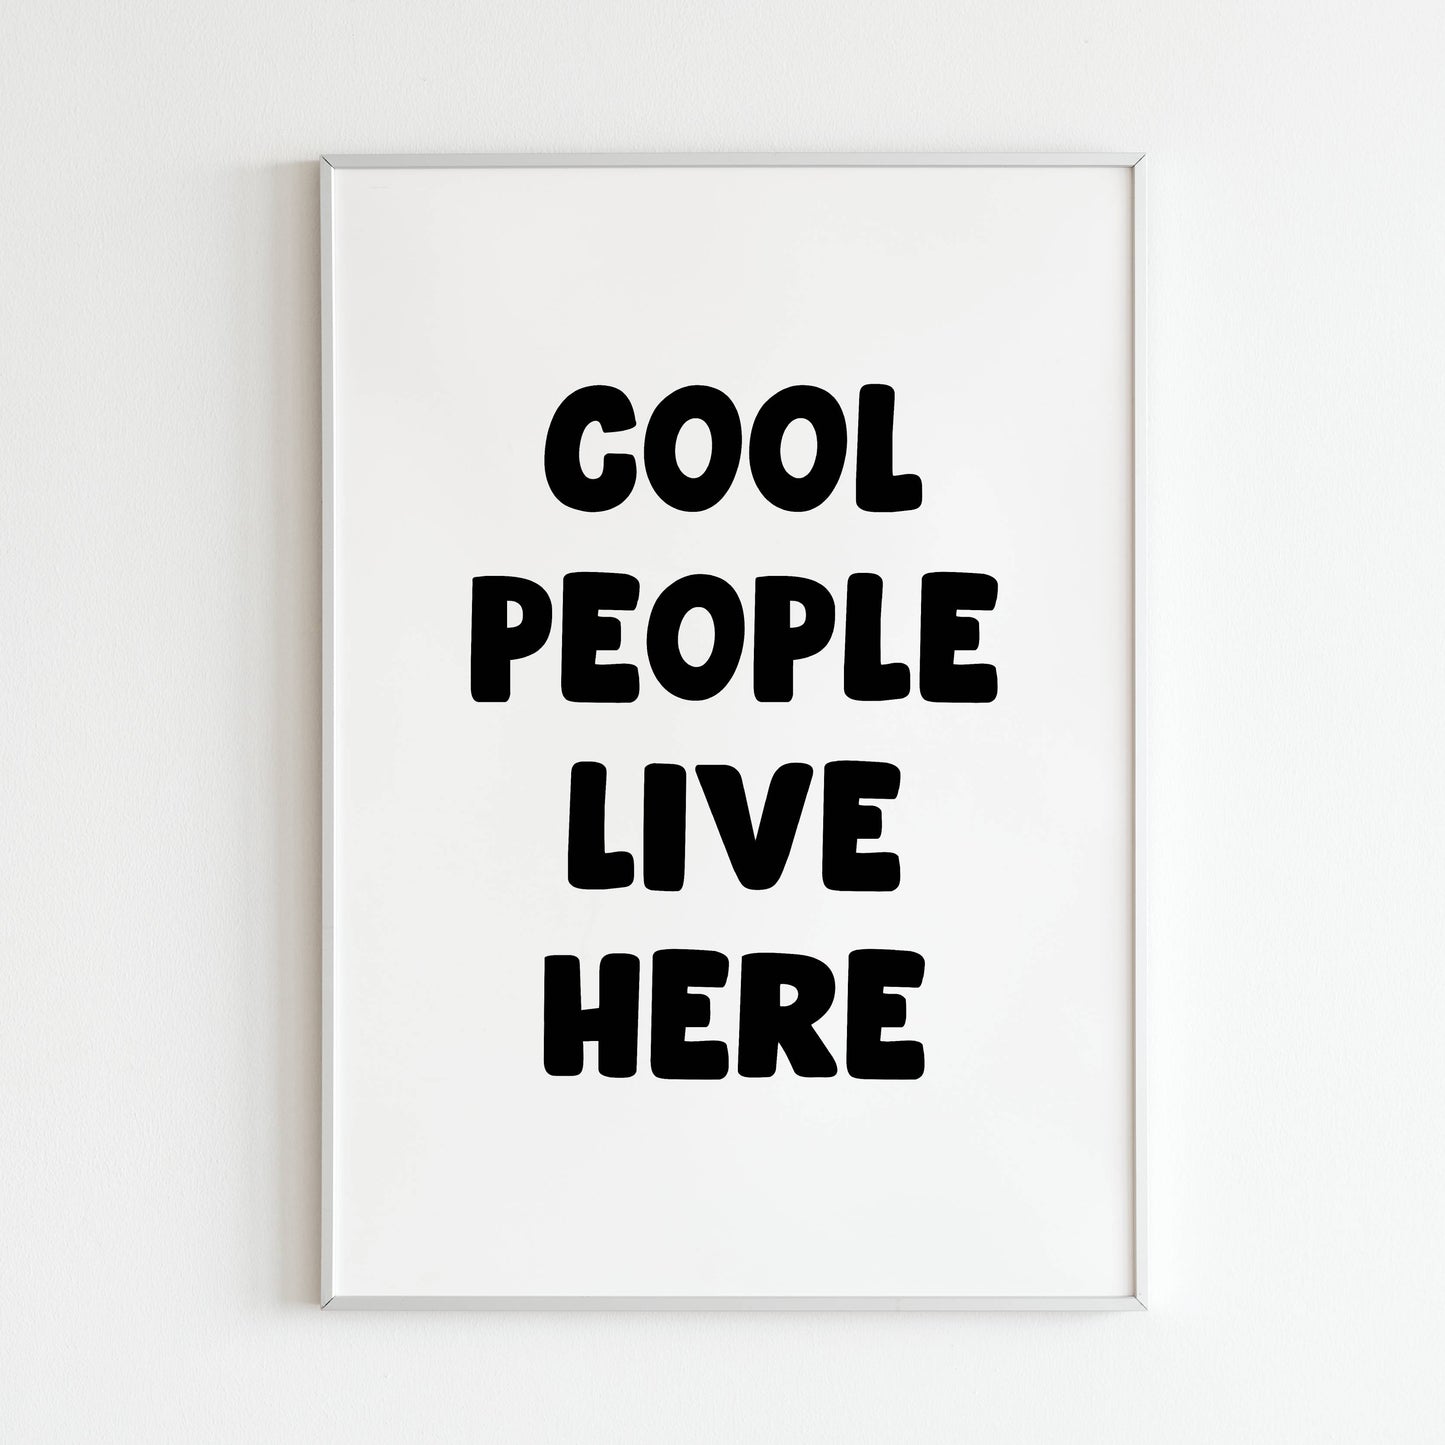 Downloadable typography wall art with a lighthearted message